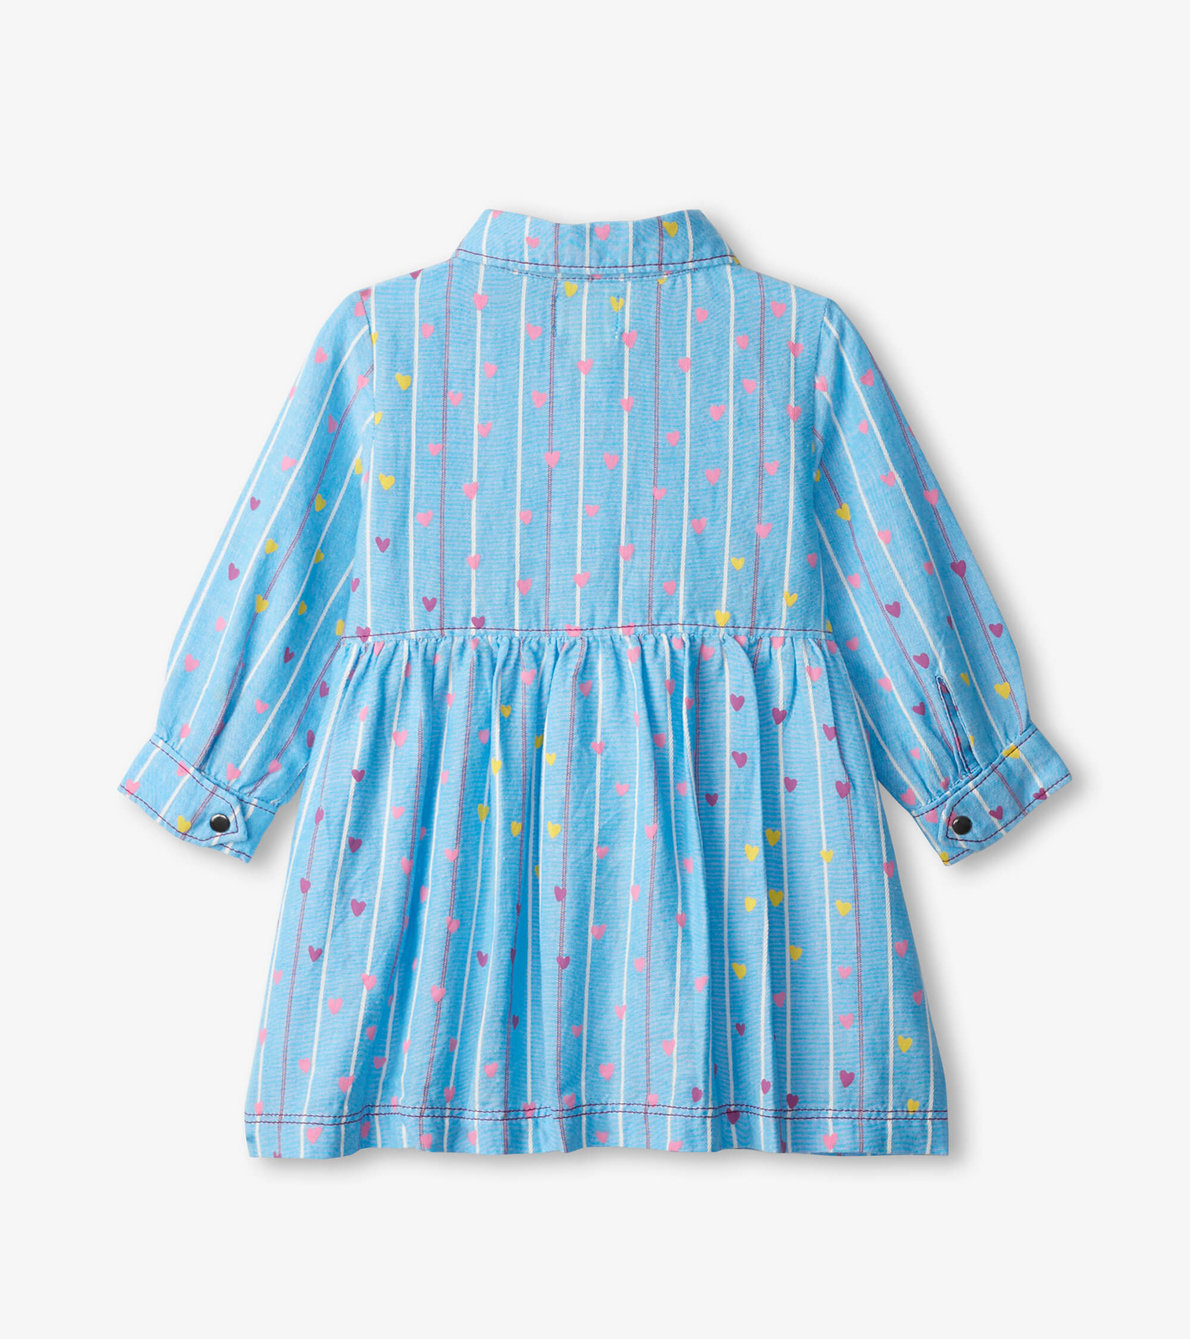 View larger image of Heart Clusters Baby Shirt Dress